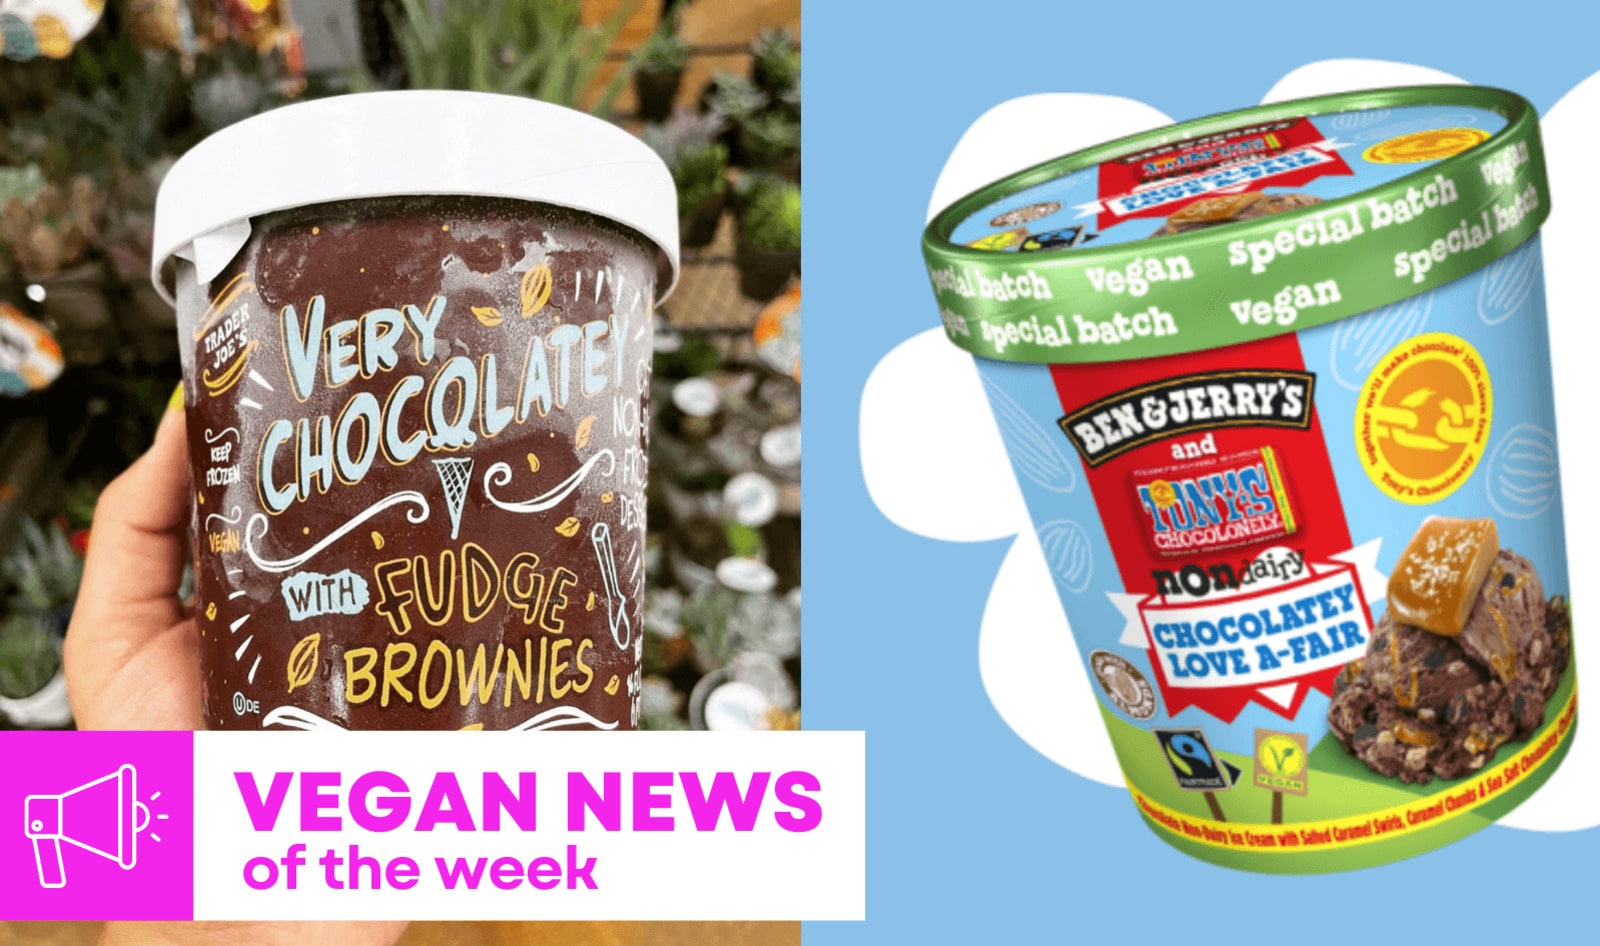 Trader Joe's and Ben & Jerry's New Ice Cream, and More Ve...